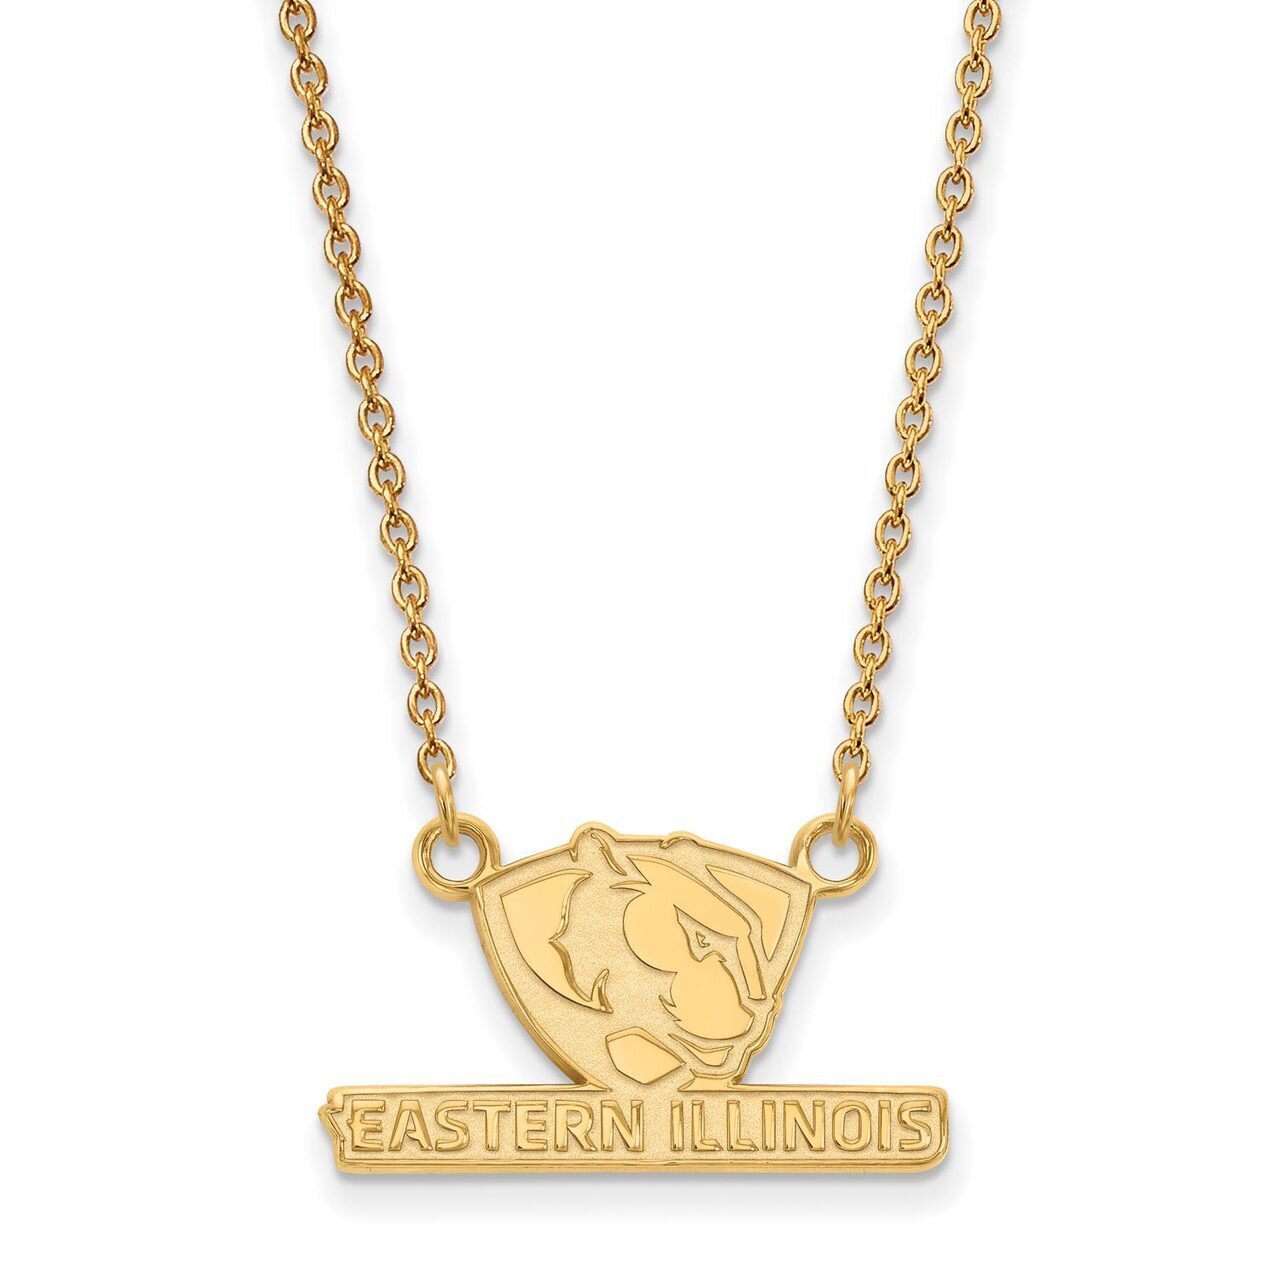 Eastern Illinois University Small Pendant with Chain Necklace 14k Yellow Gold 4Y007EIU-18